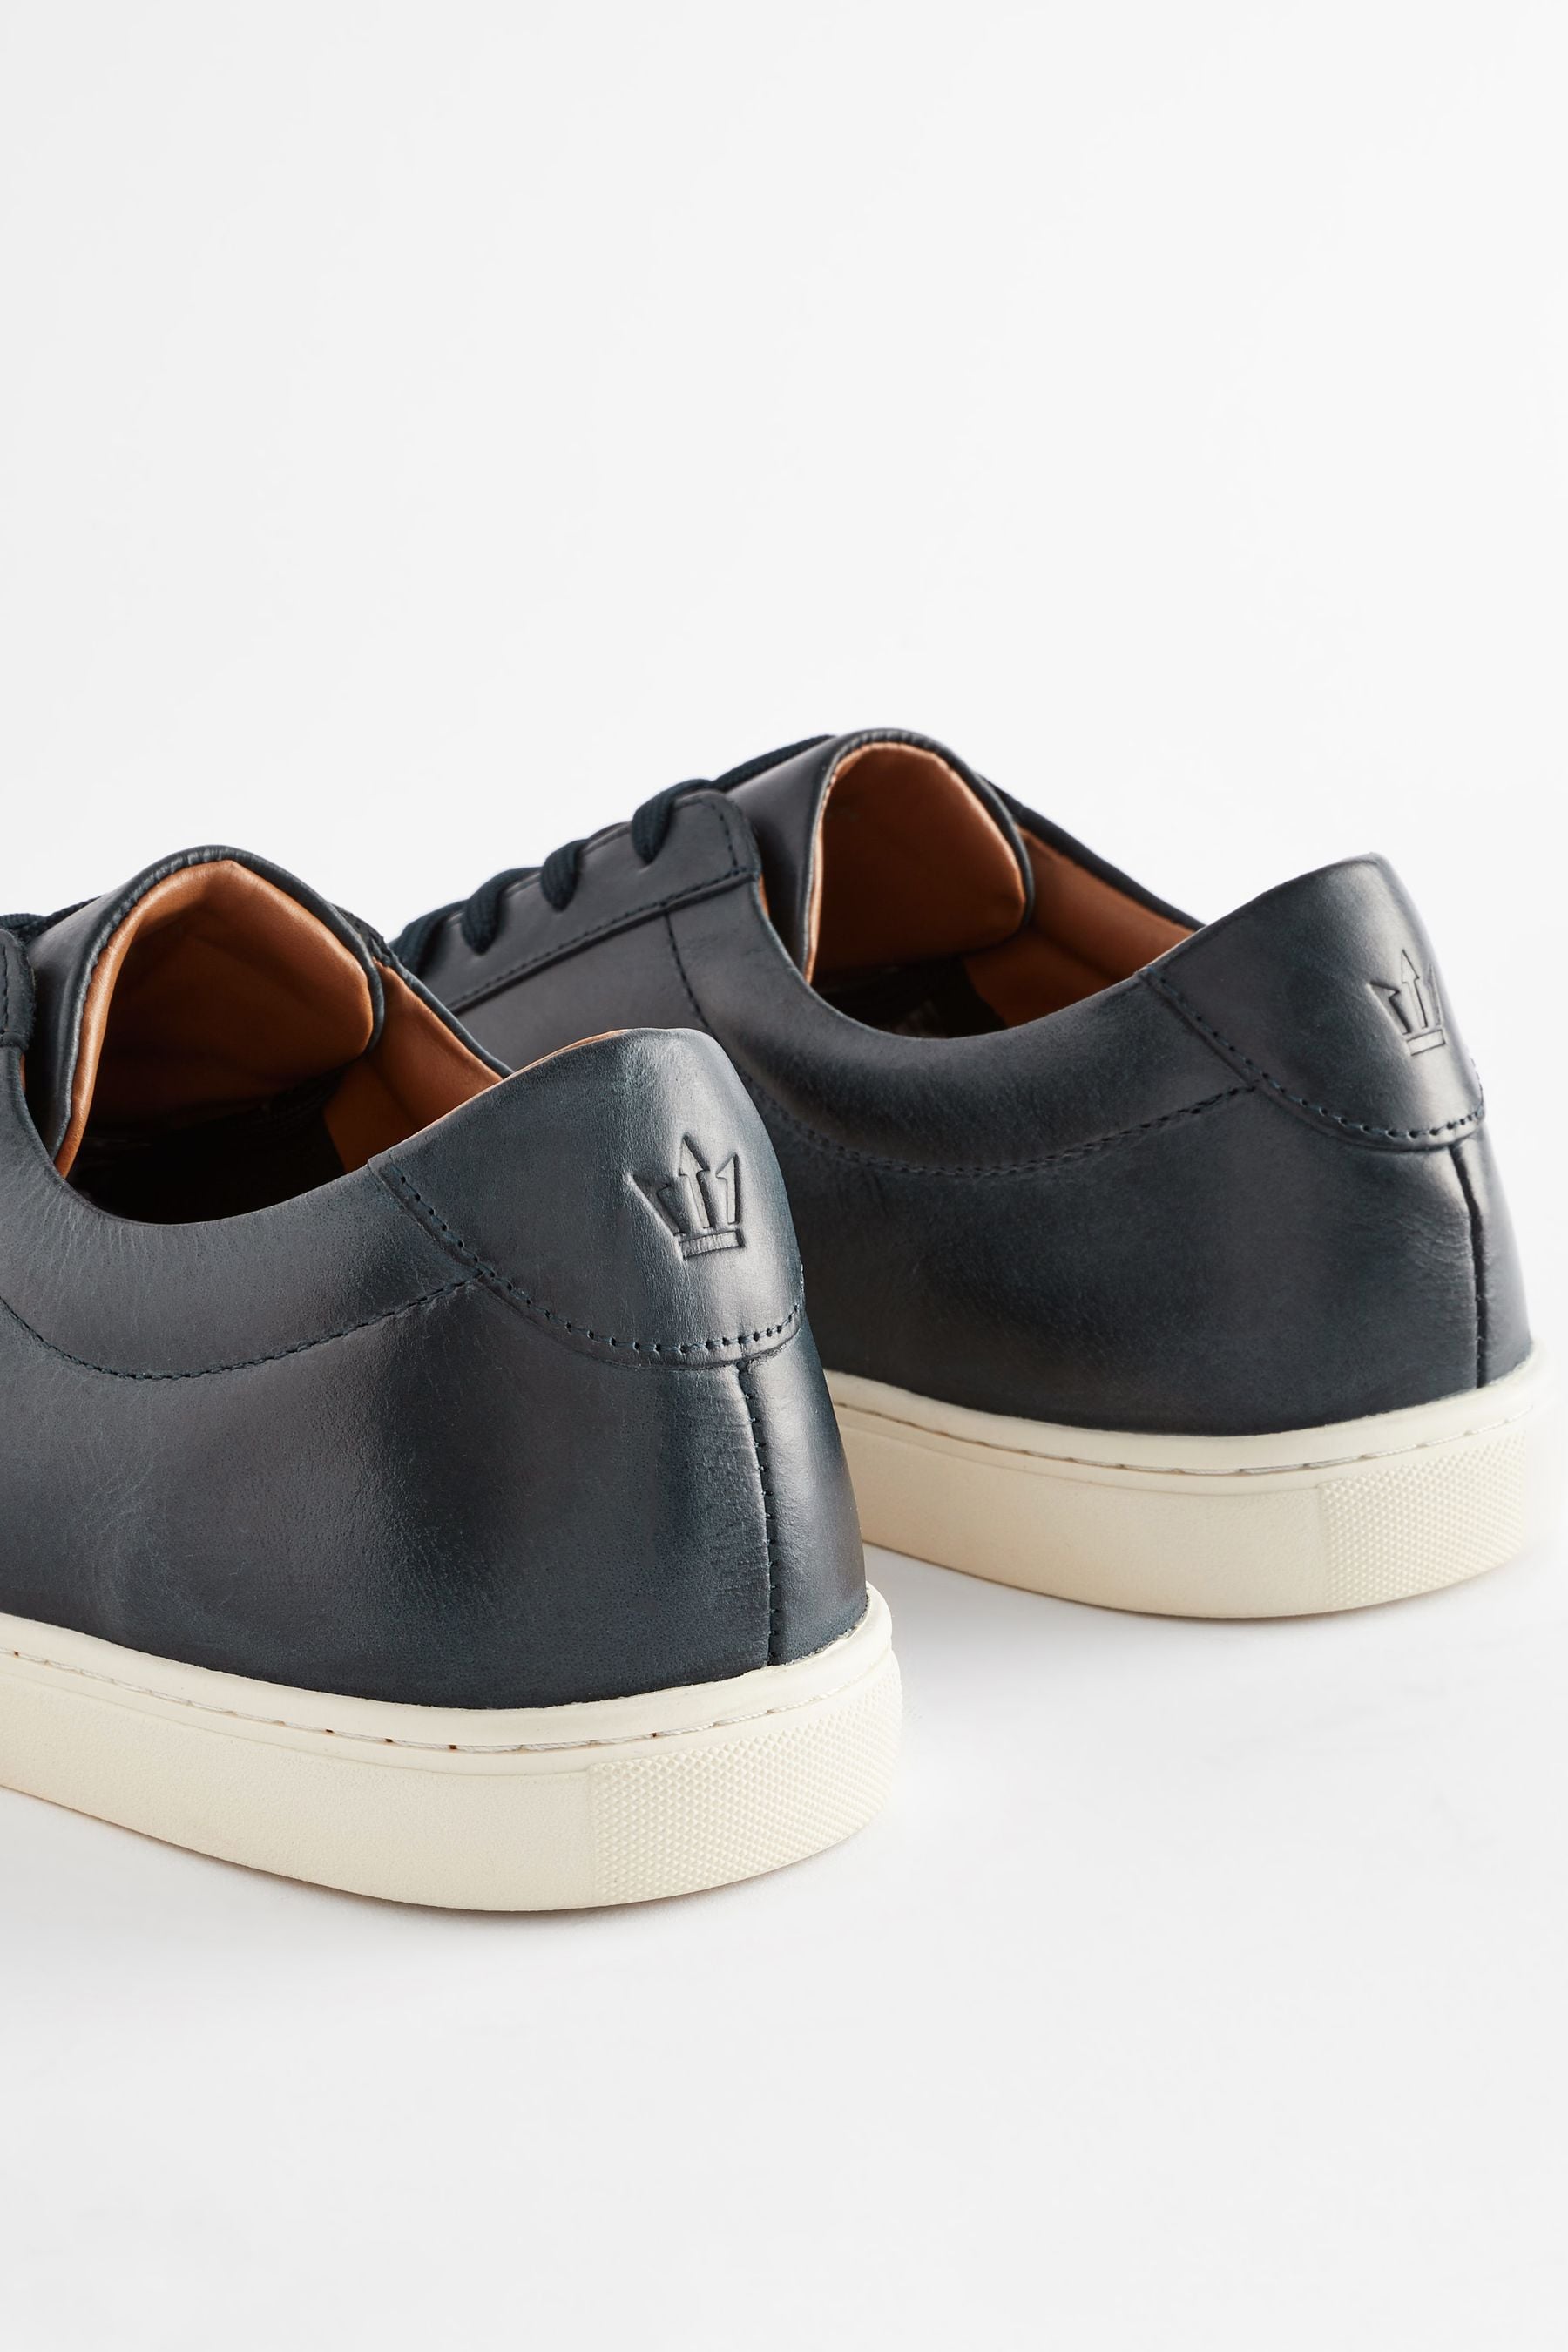 Buy Leather Trainers from the Next UK online shop